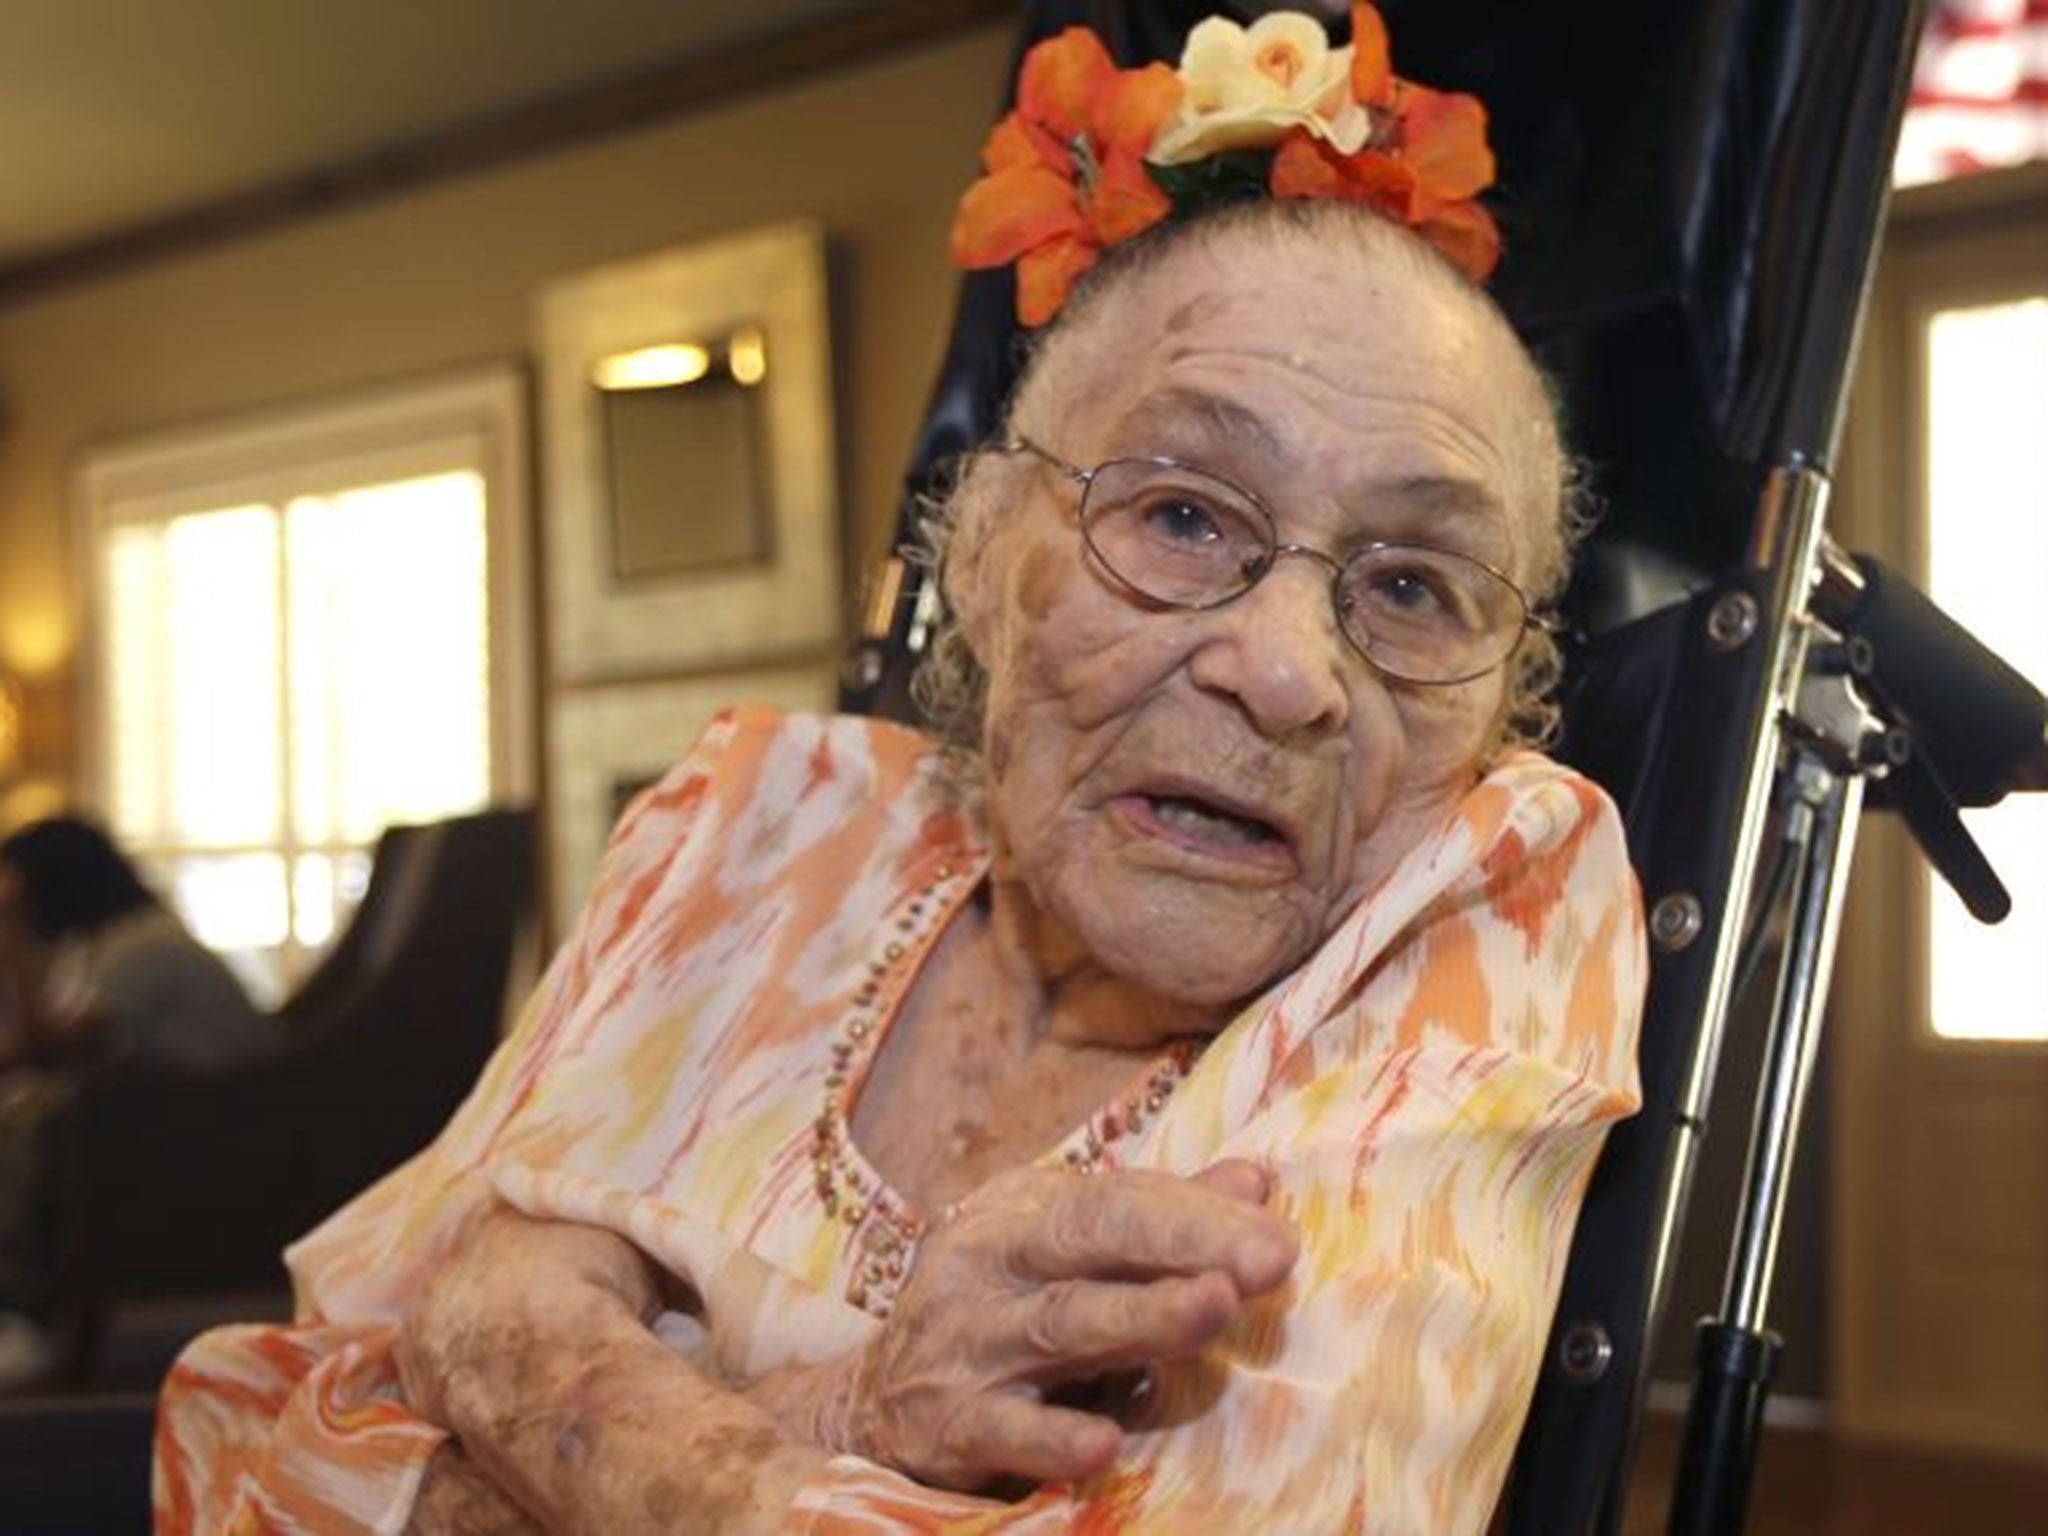 Gertrude Weaver, the world's oldest woman, has died.